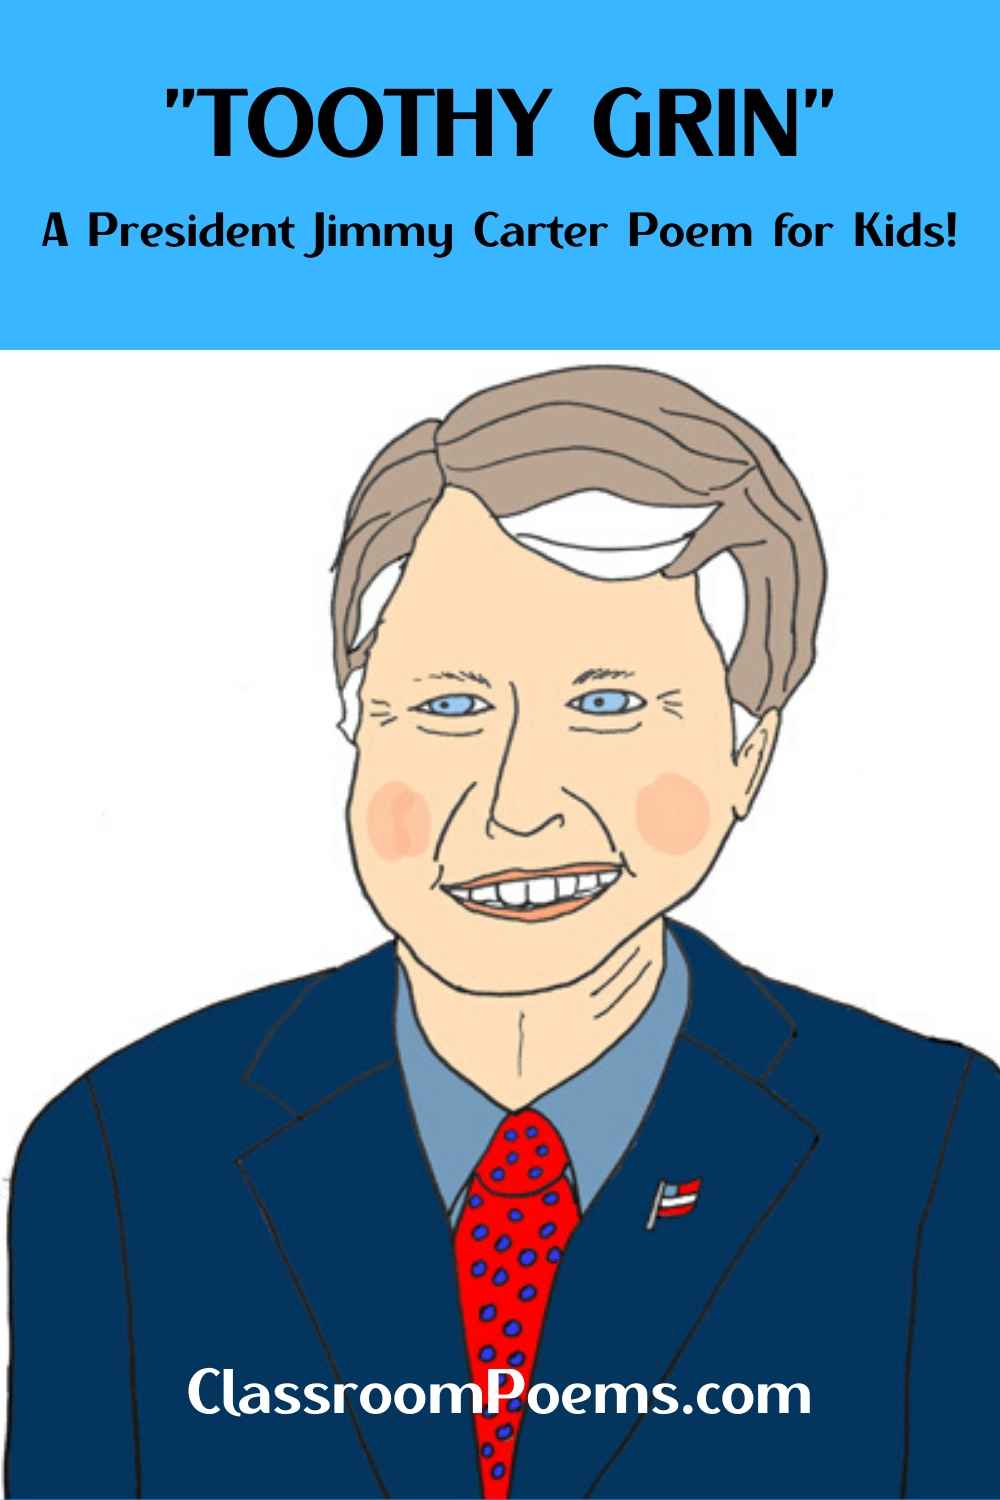 Jimmy Carter drawing and poem. Jimmy Carter cartoon drawing.